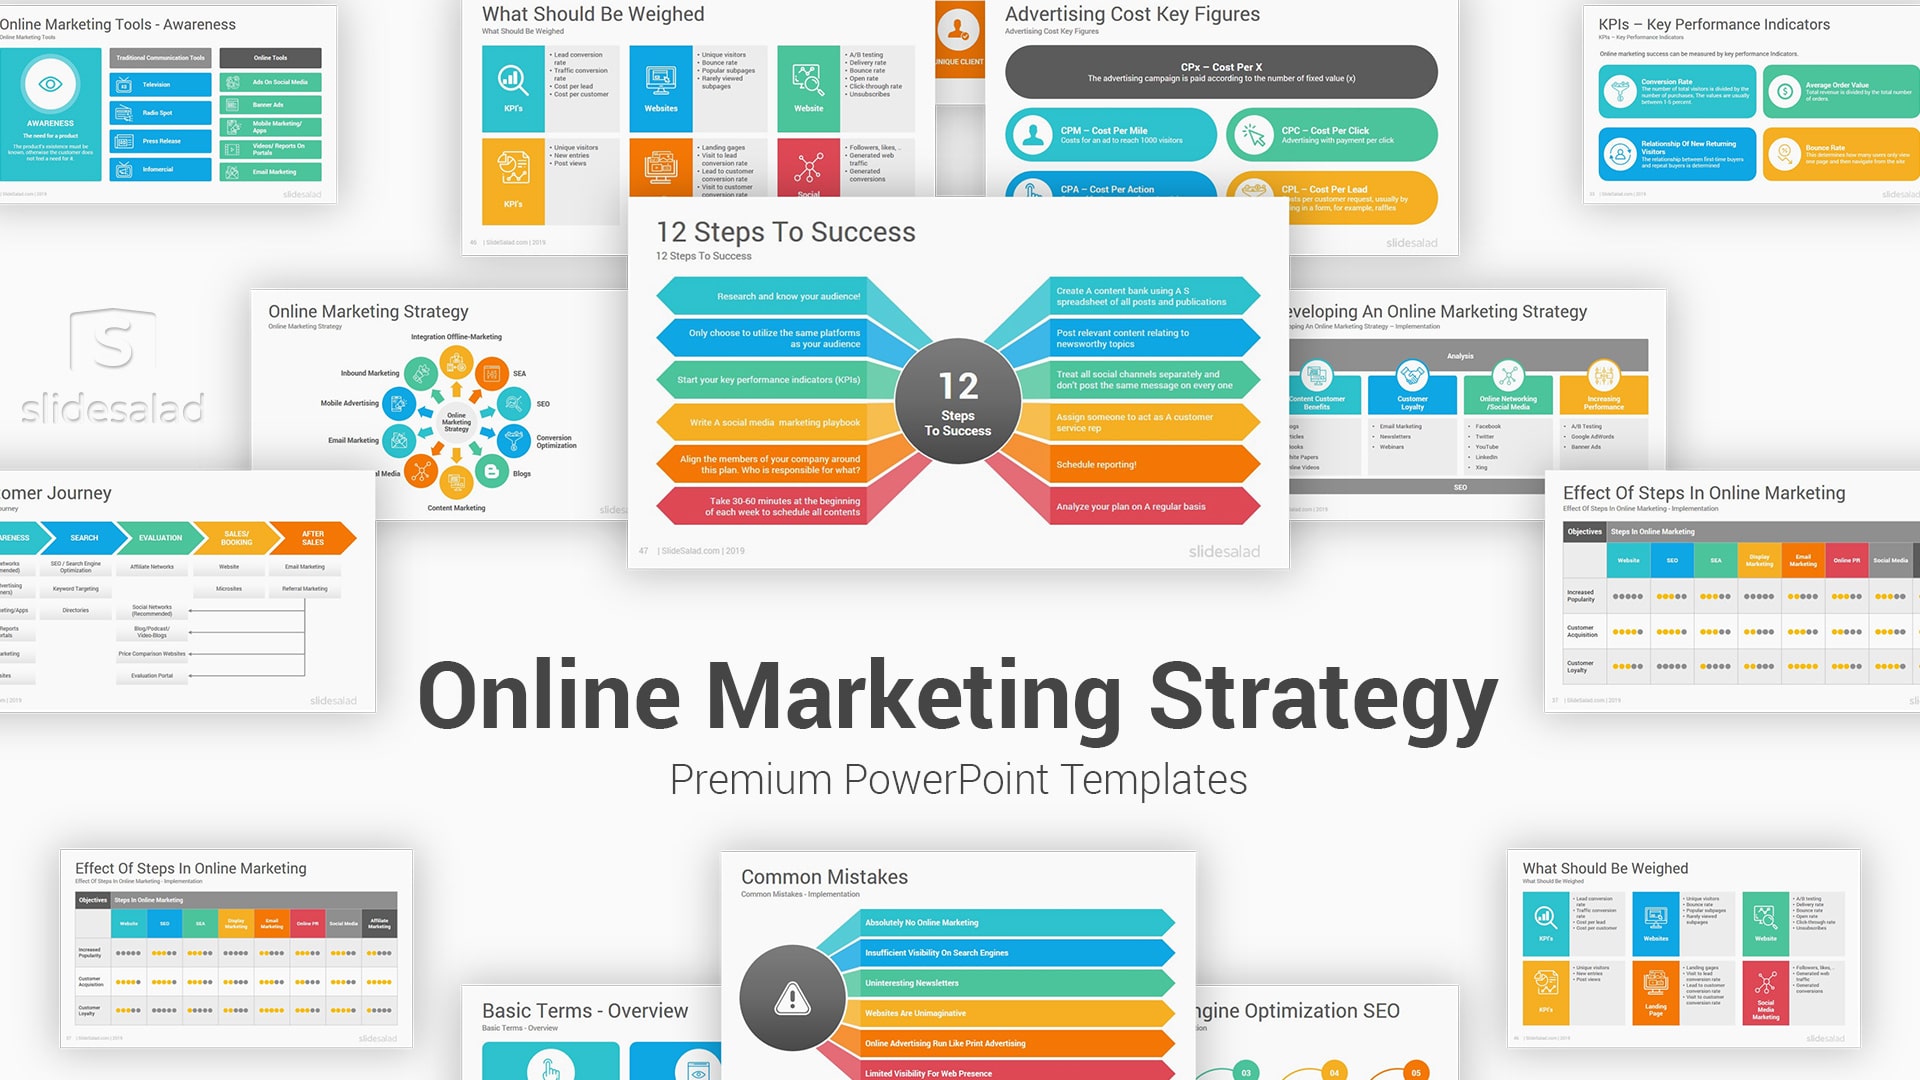 Online Marketing Strategy PowerPoint Template